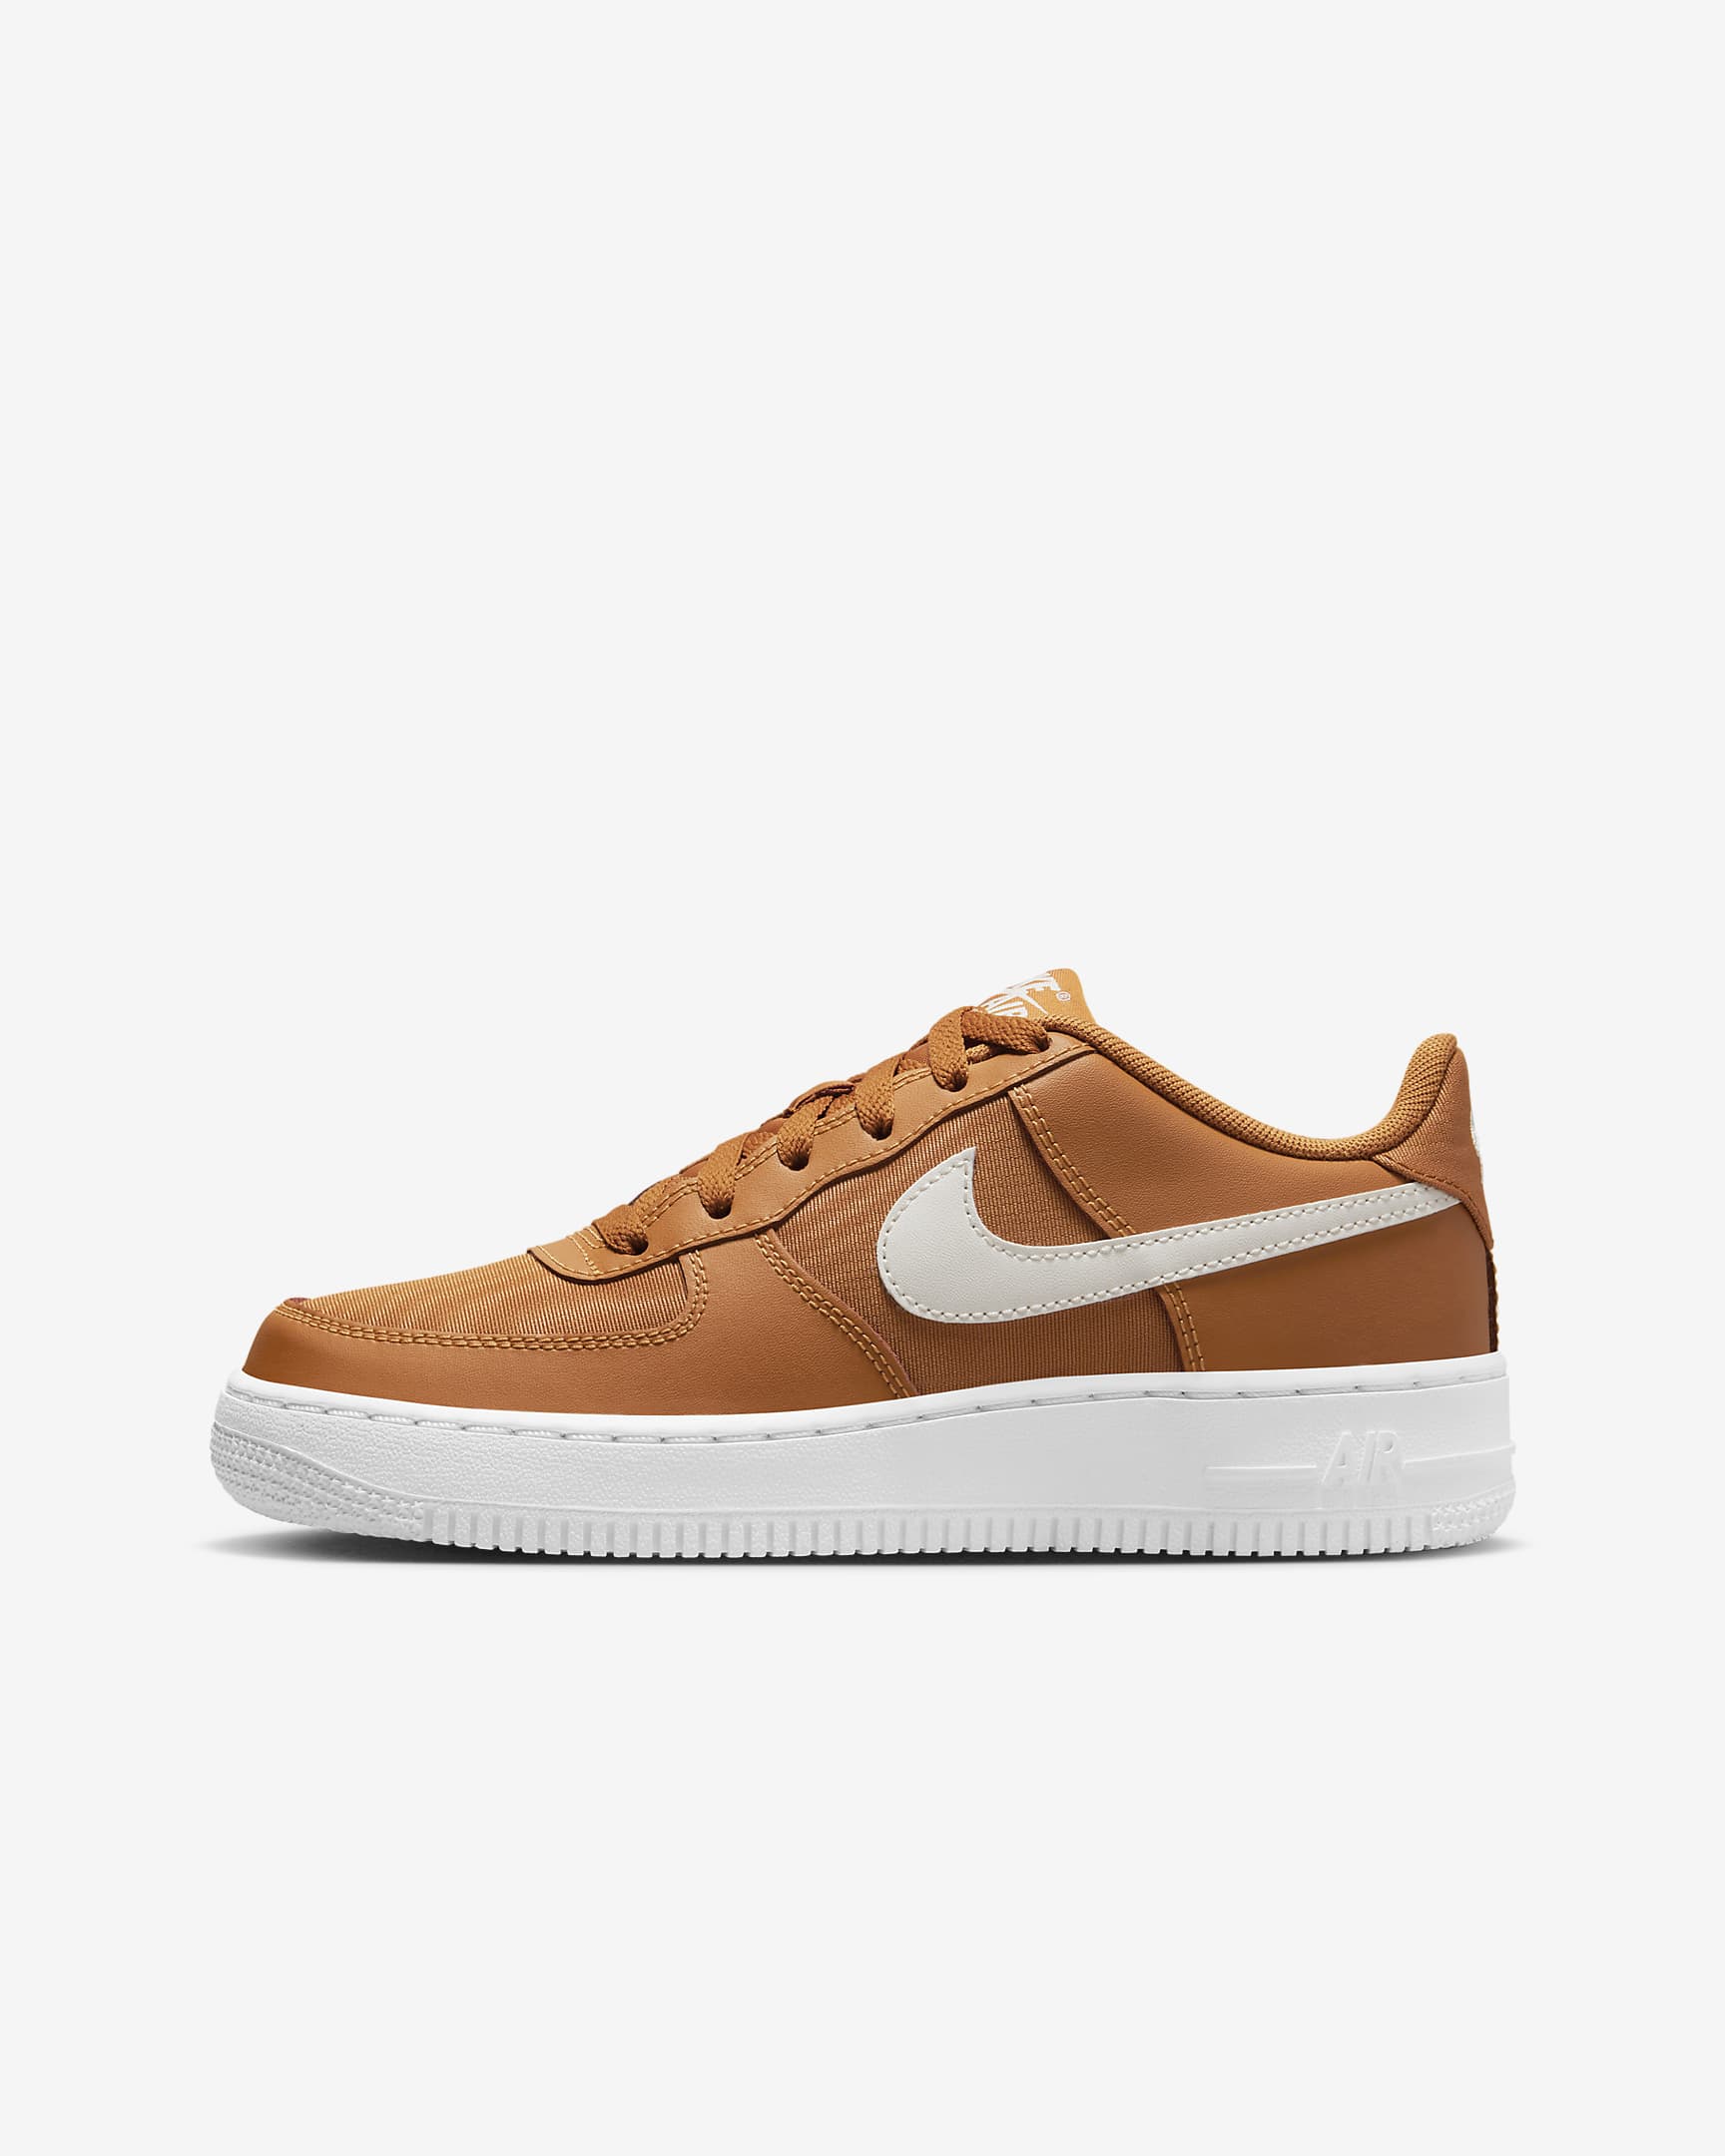 Nike Air Force 1 LV8 2 Older Kids' Shoes. Nike IL